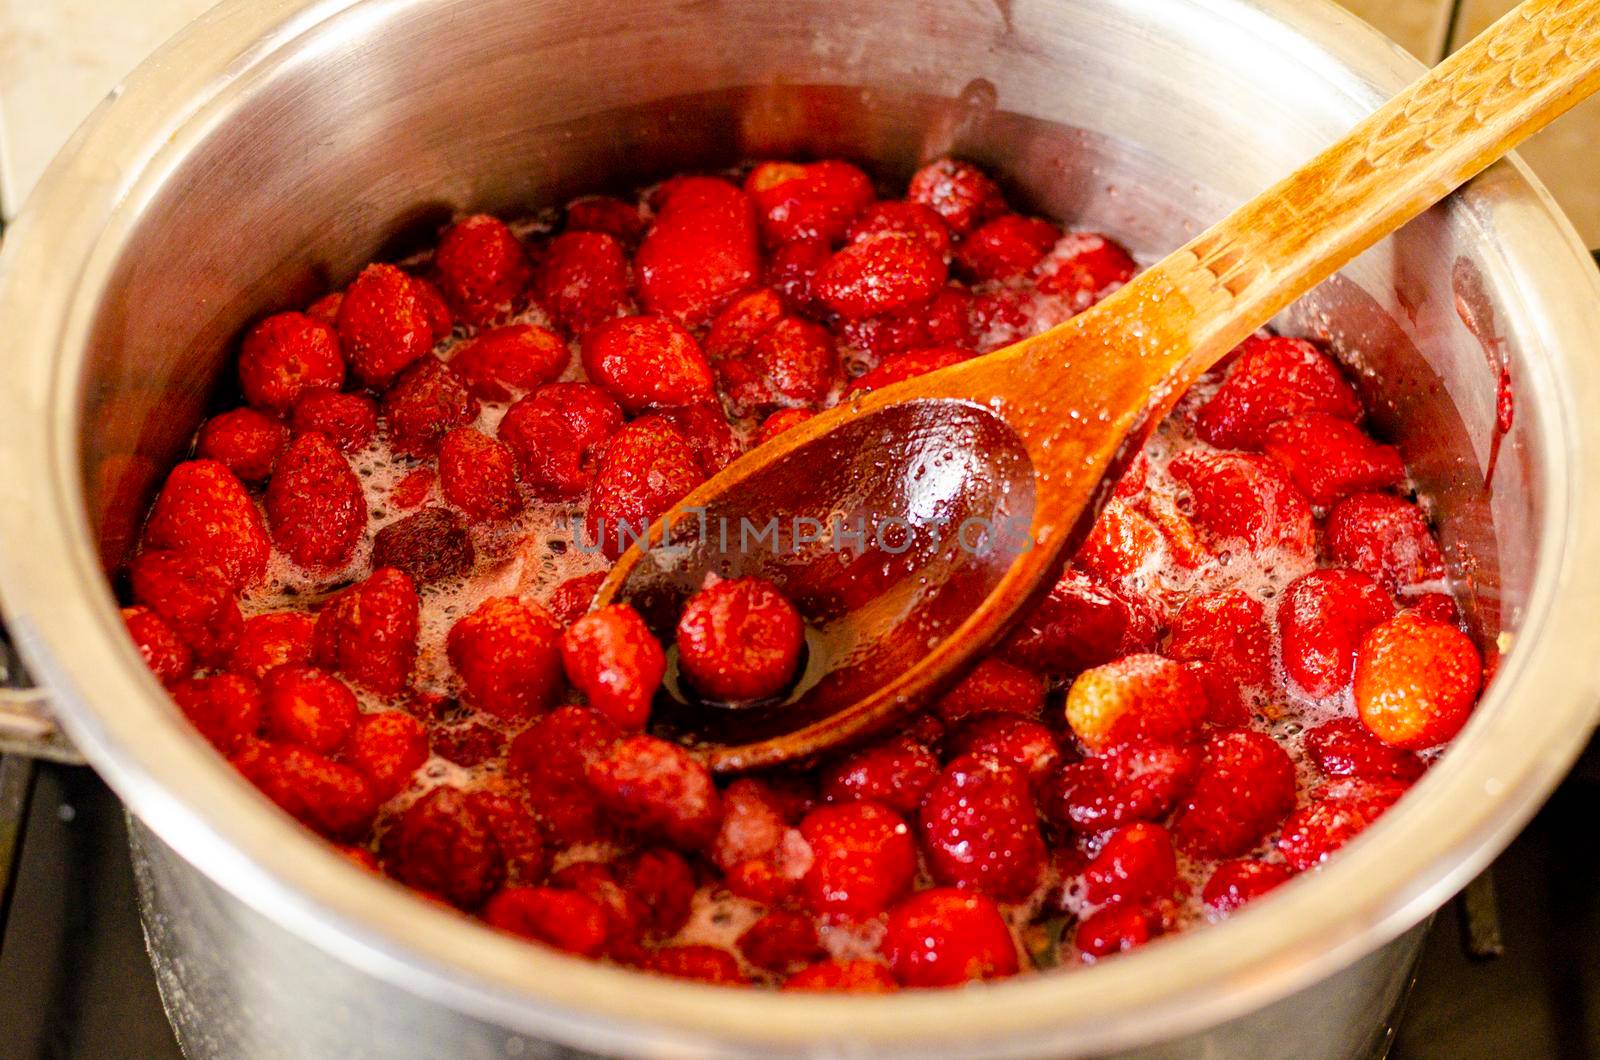 Strawberries are boiled with sugar in pan. Studio Photo